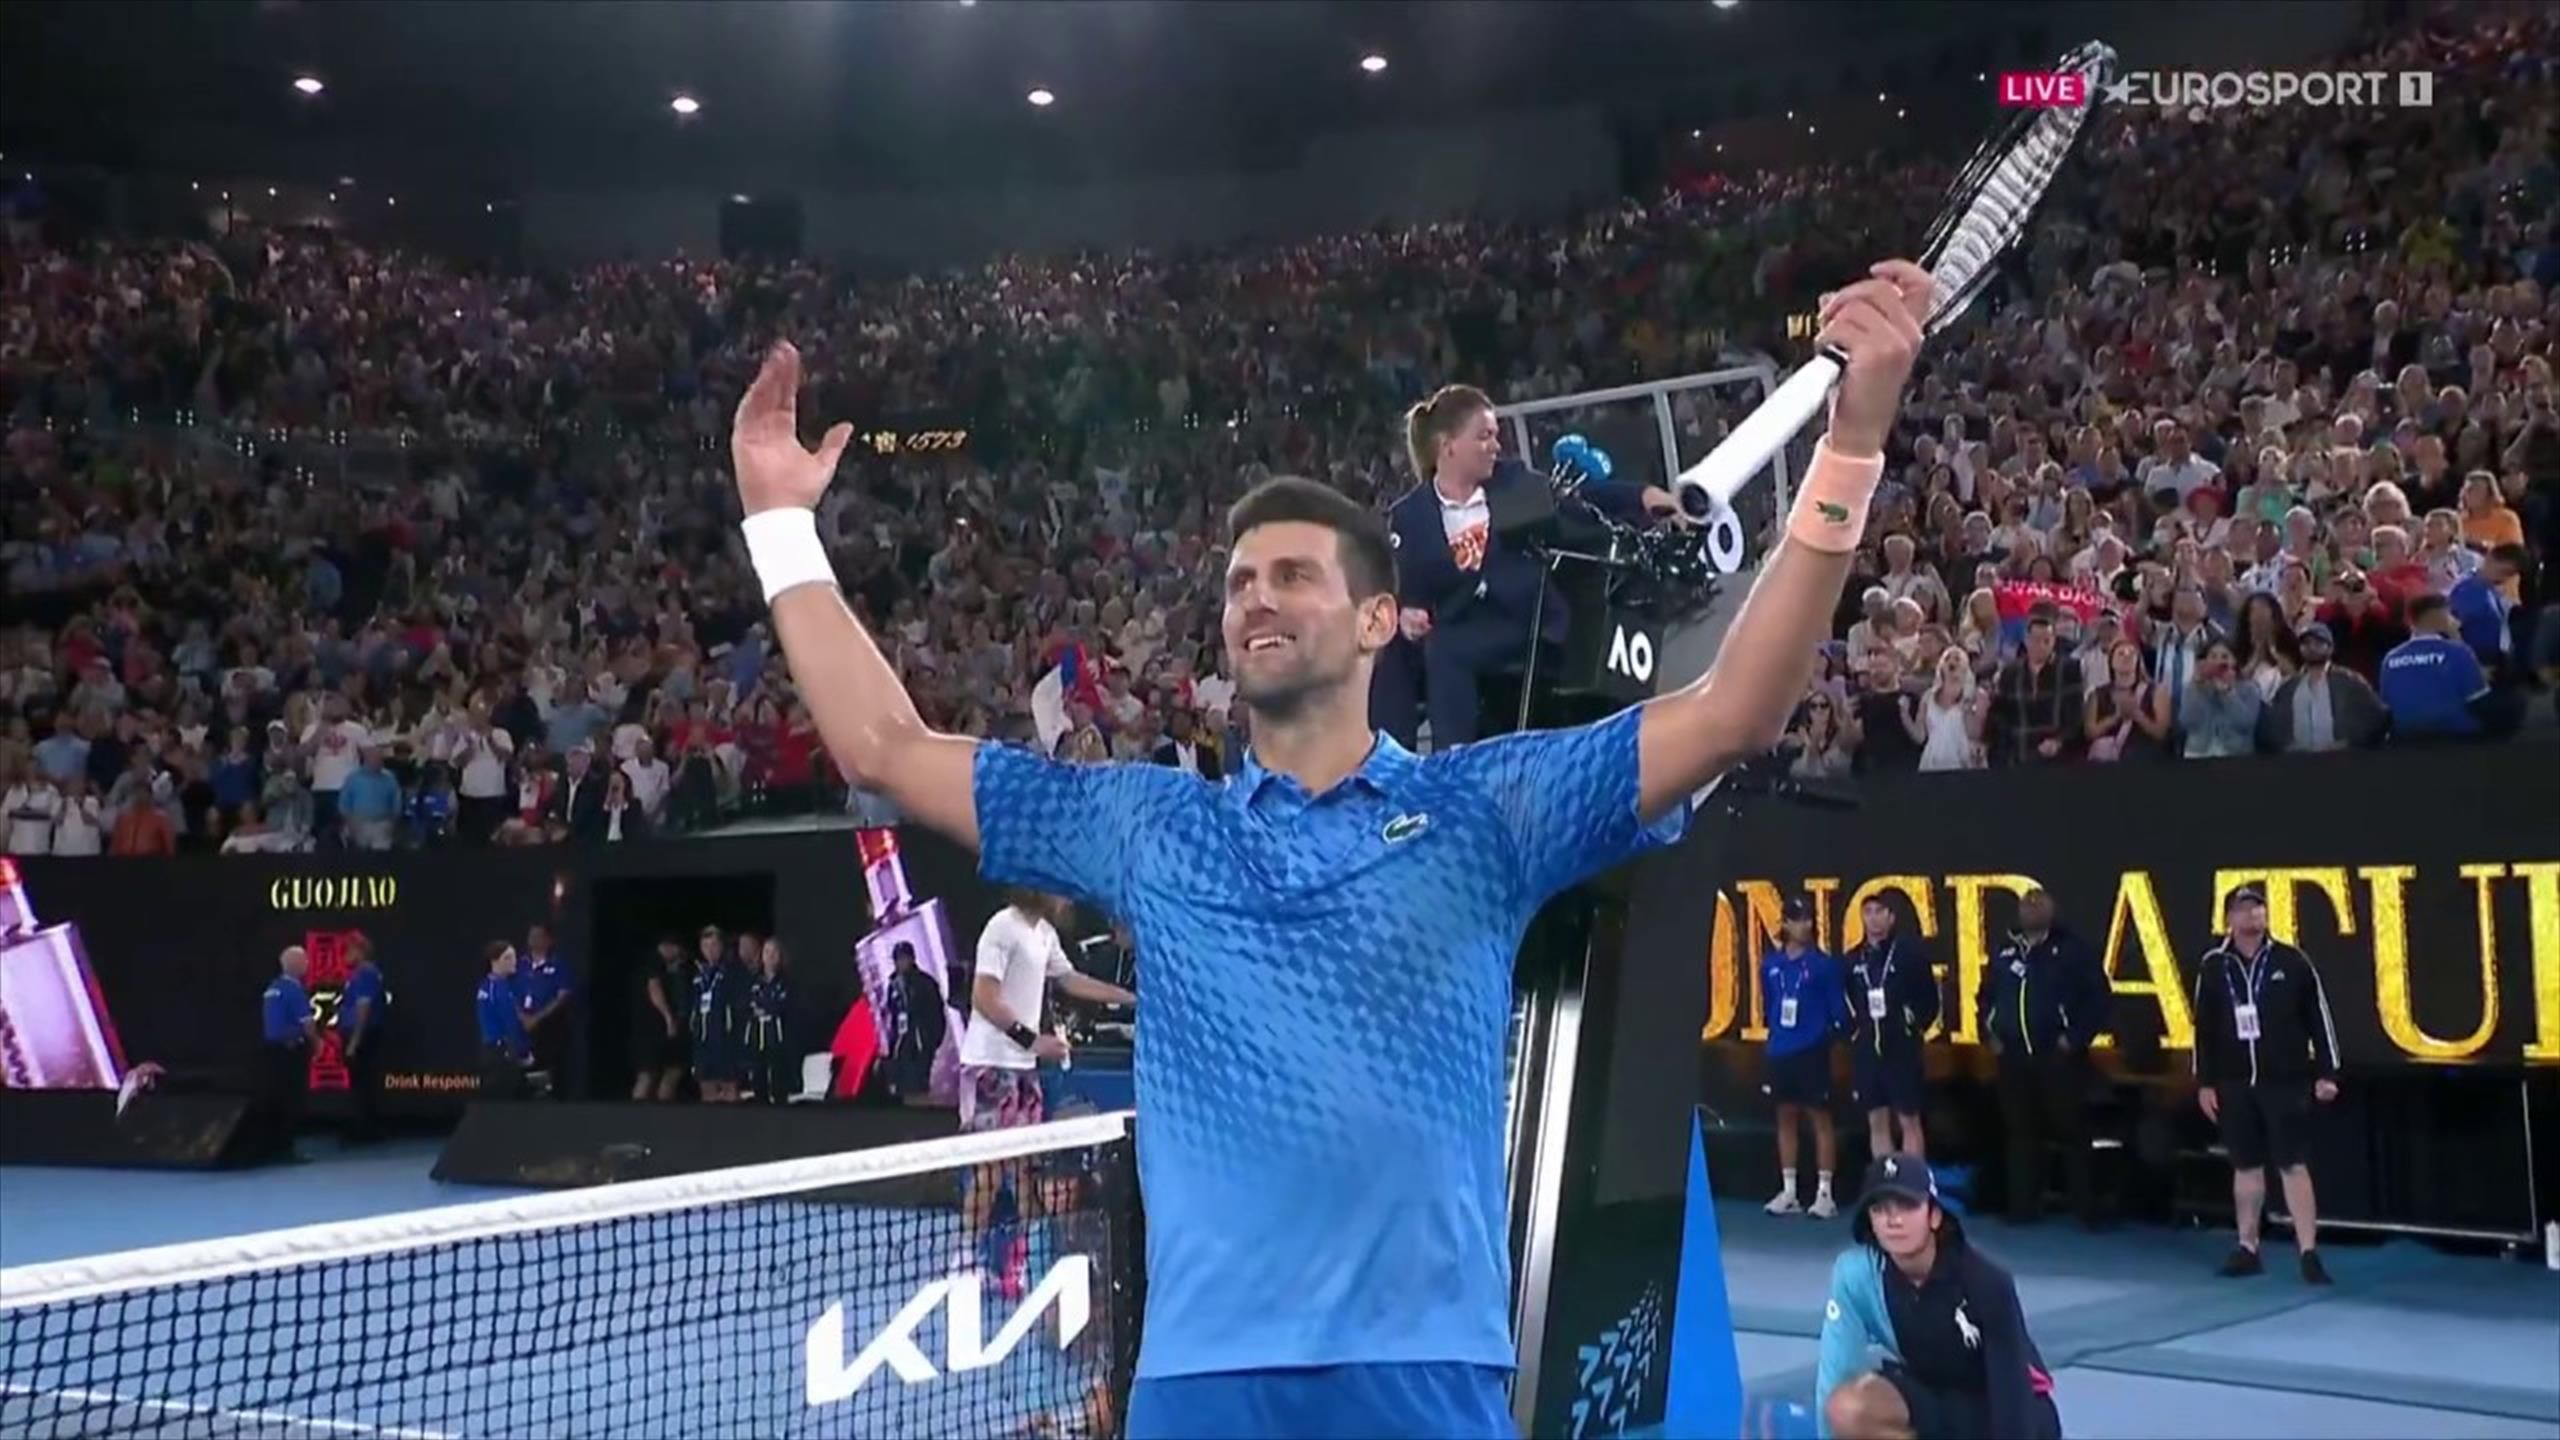 Tears flow as Novak Djokovic clinches 10th Australian Open title and 22nd Grand Slam with win over Stefanos Tsitsipas - Tennis video